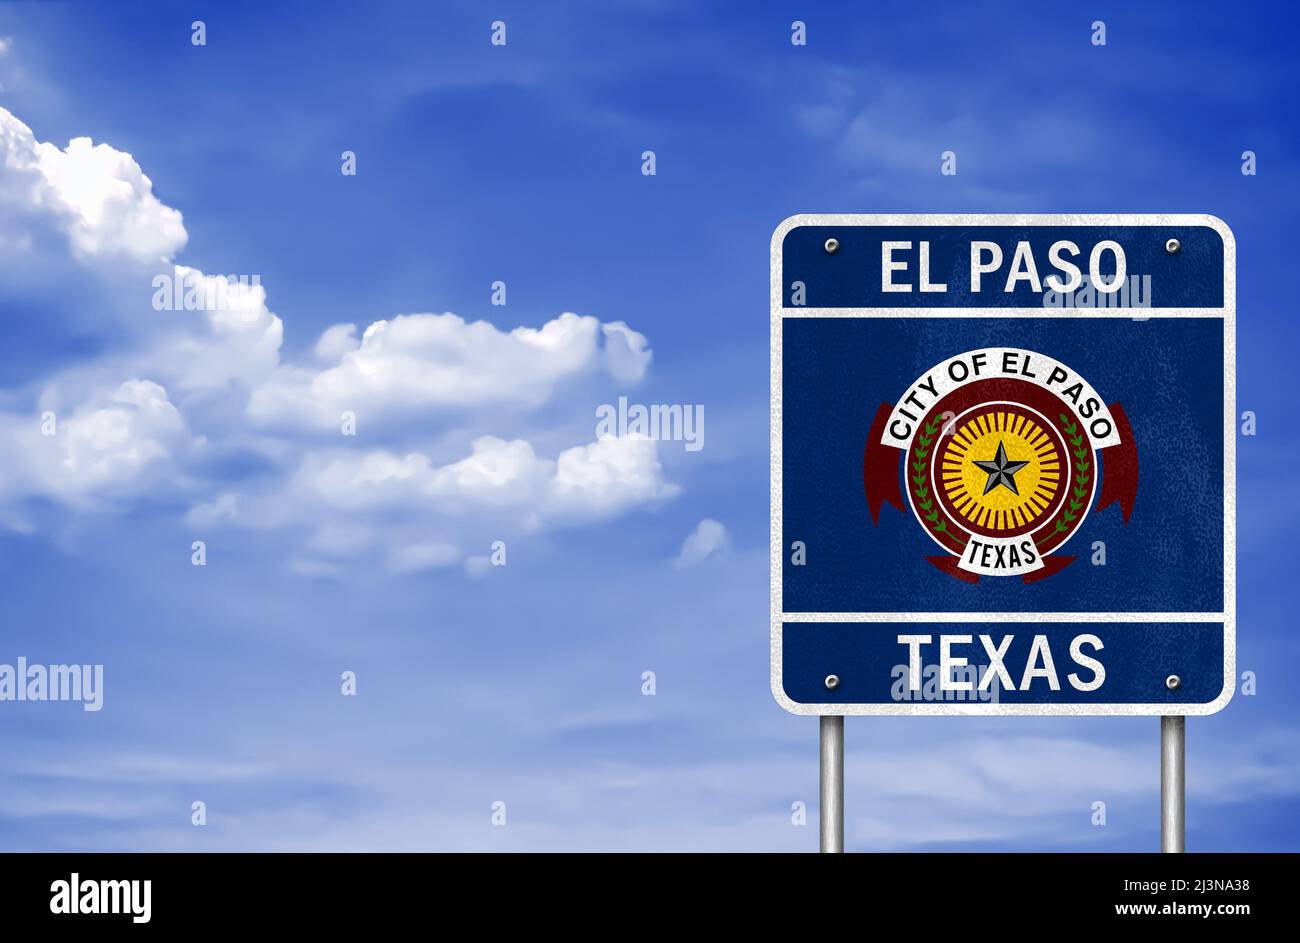 Welcome to El Paso in Texas Stock Photo